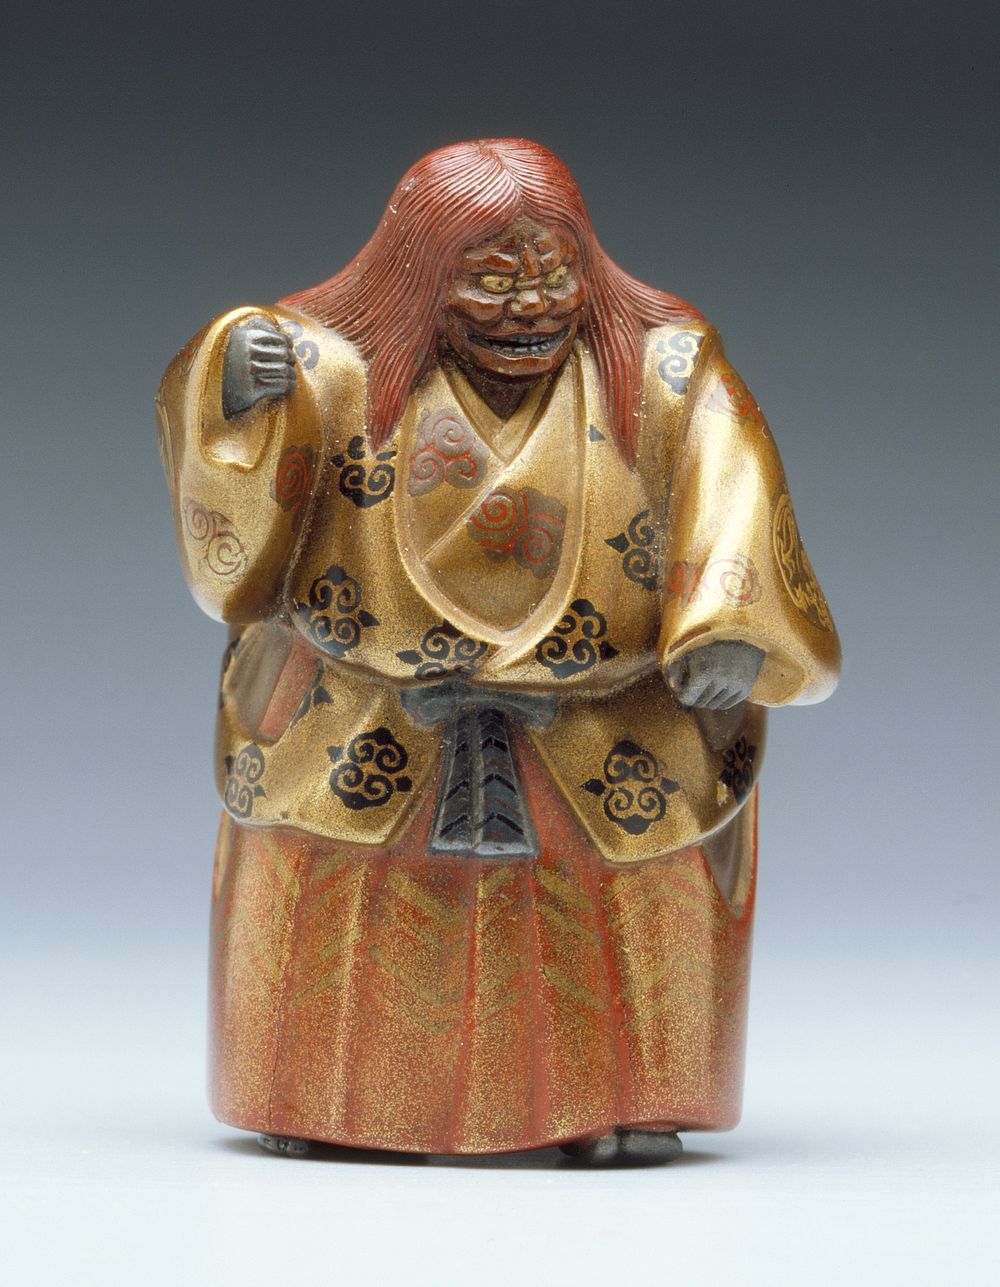 Noh Actor as Lion in the Play, "Stone Bridge" by Koma Bunsai